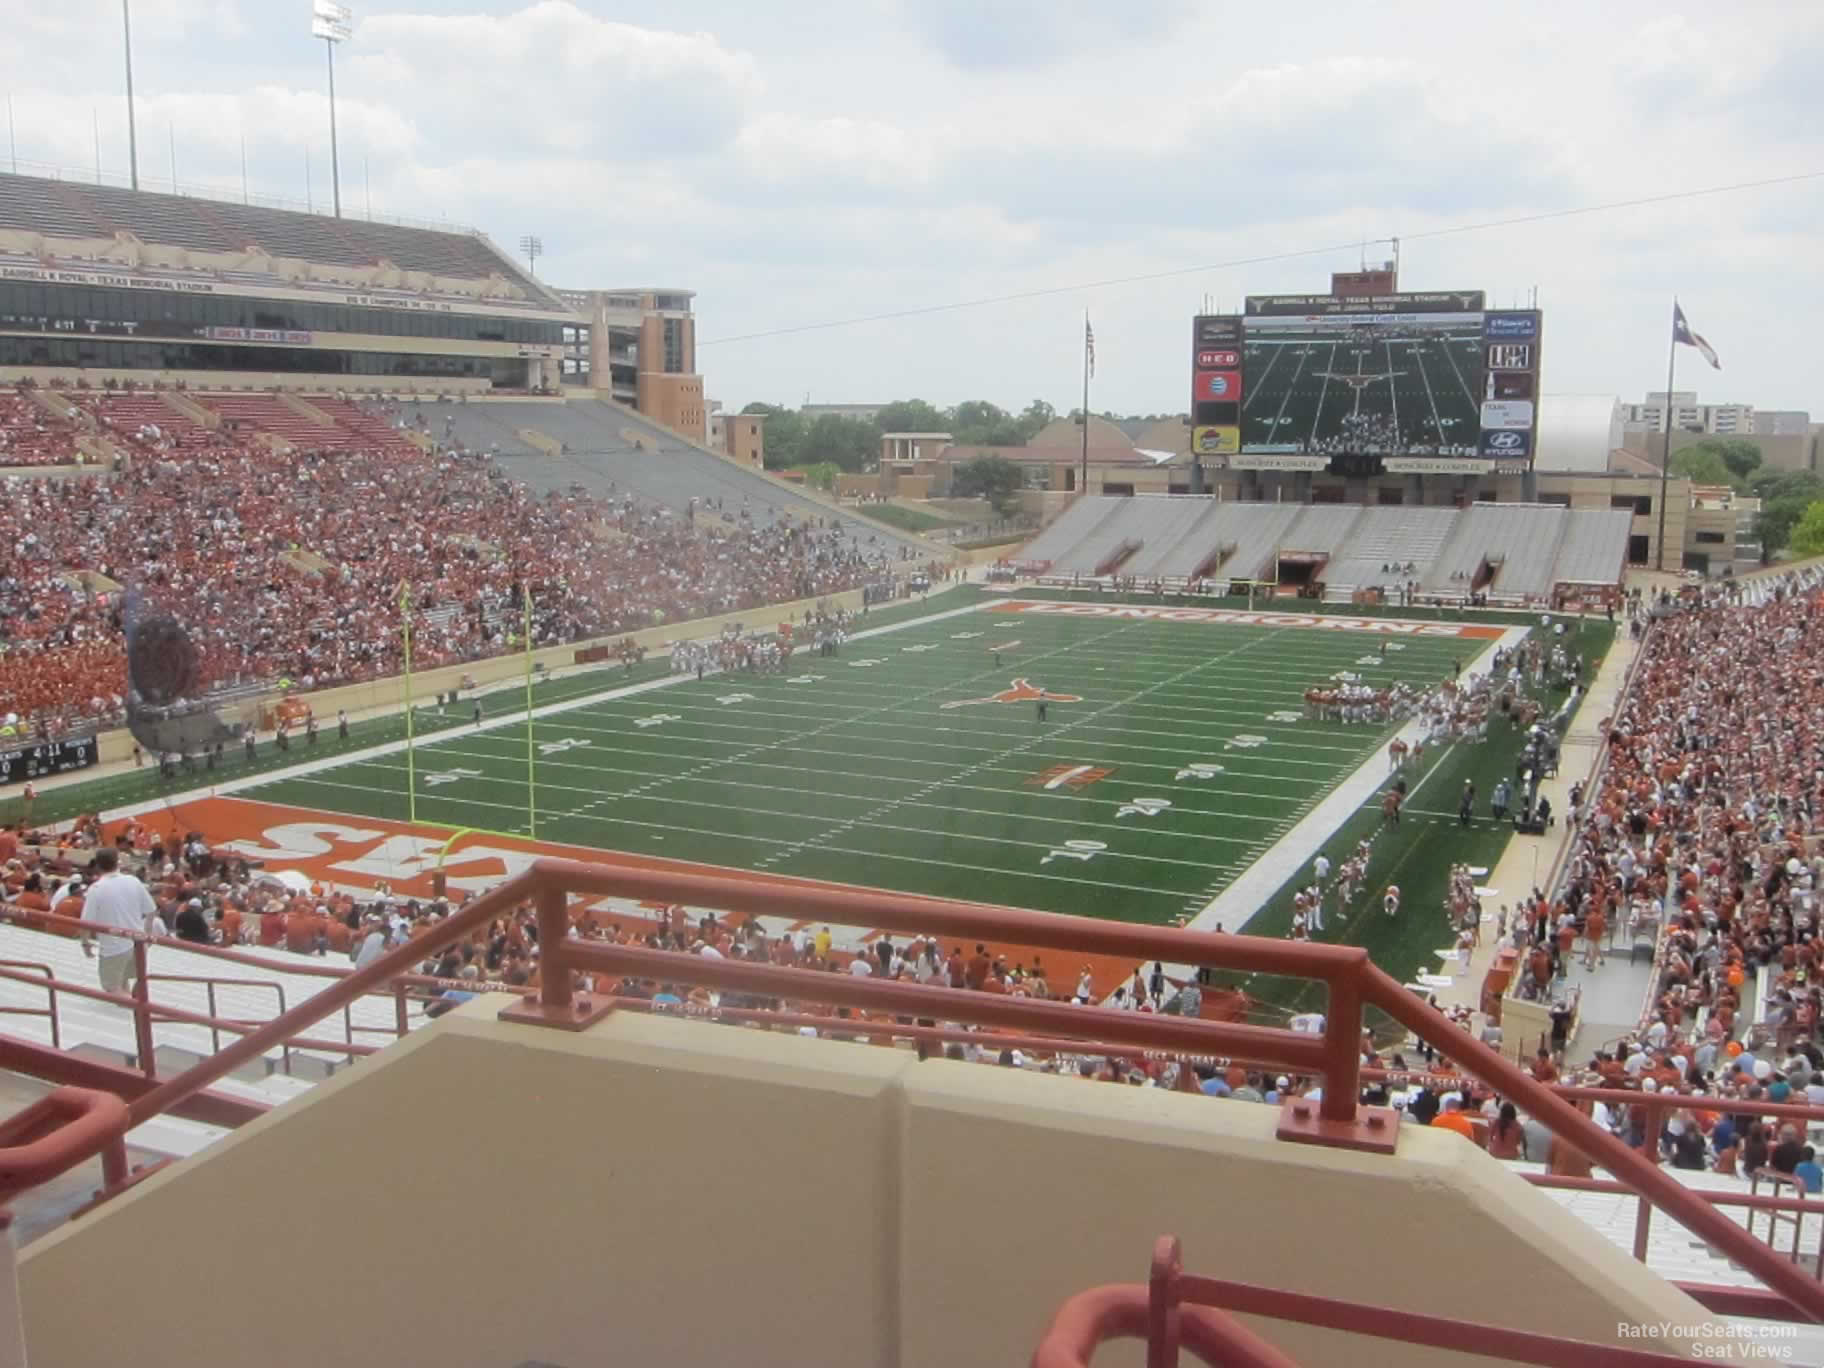 section 14, row 54 seat view  - dkr-texas memorial stadium